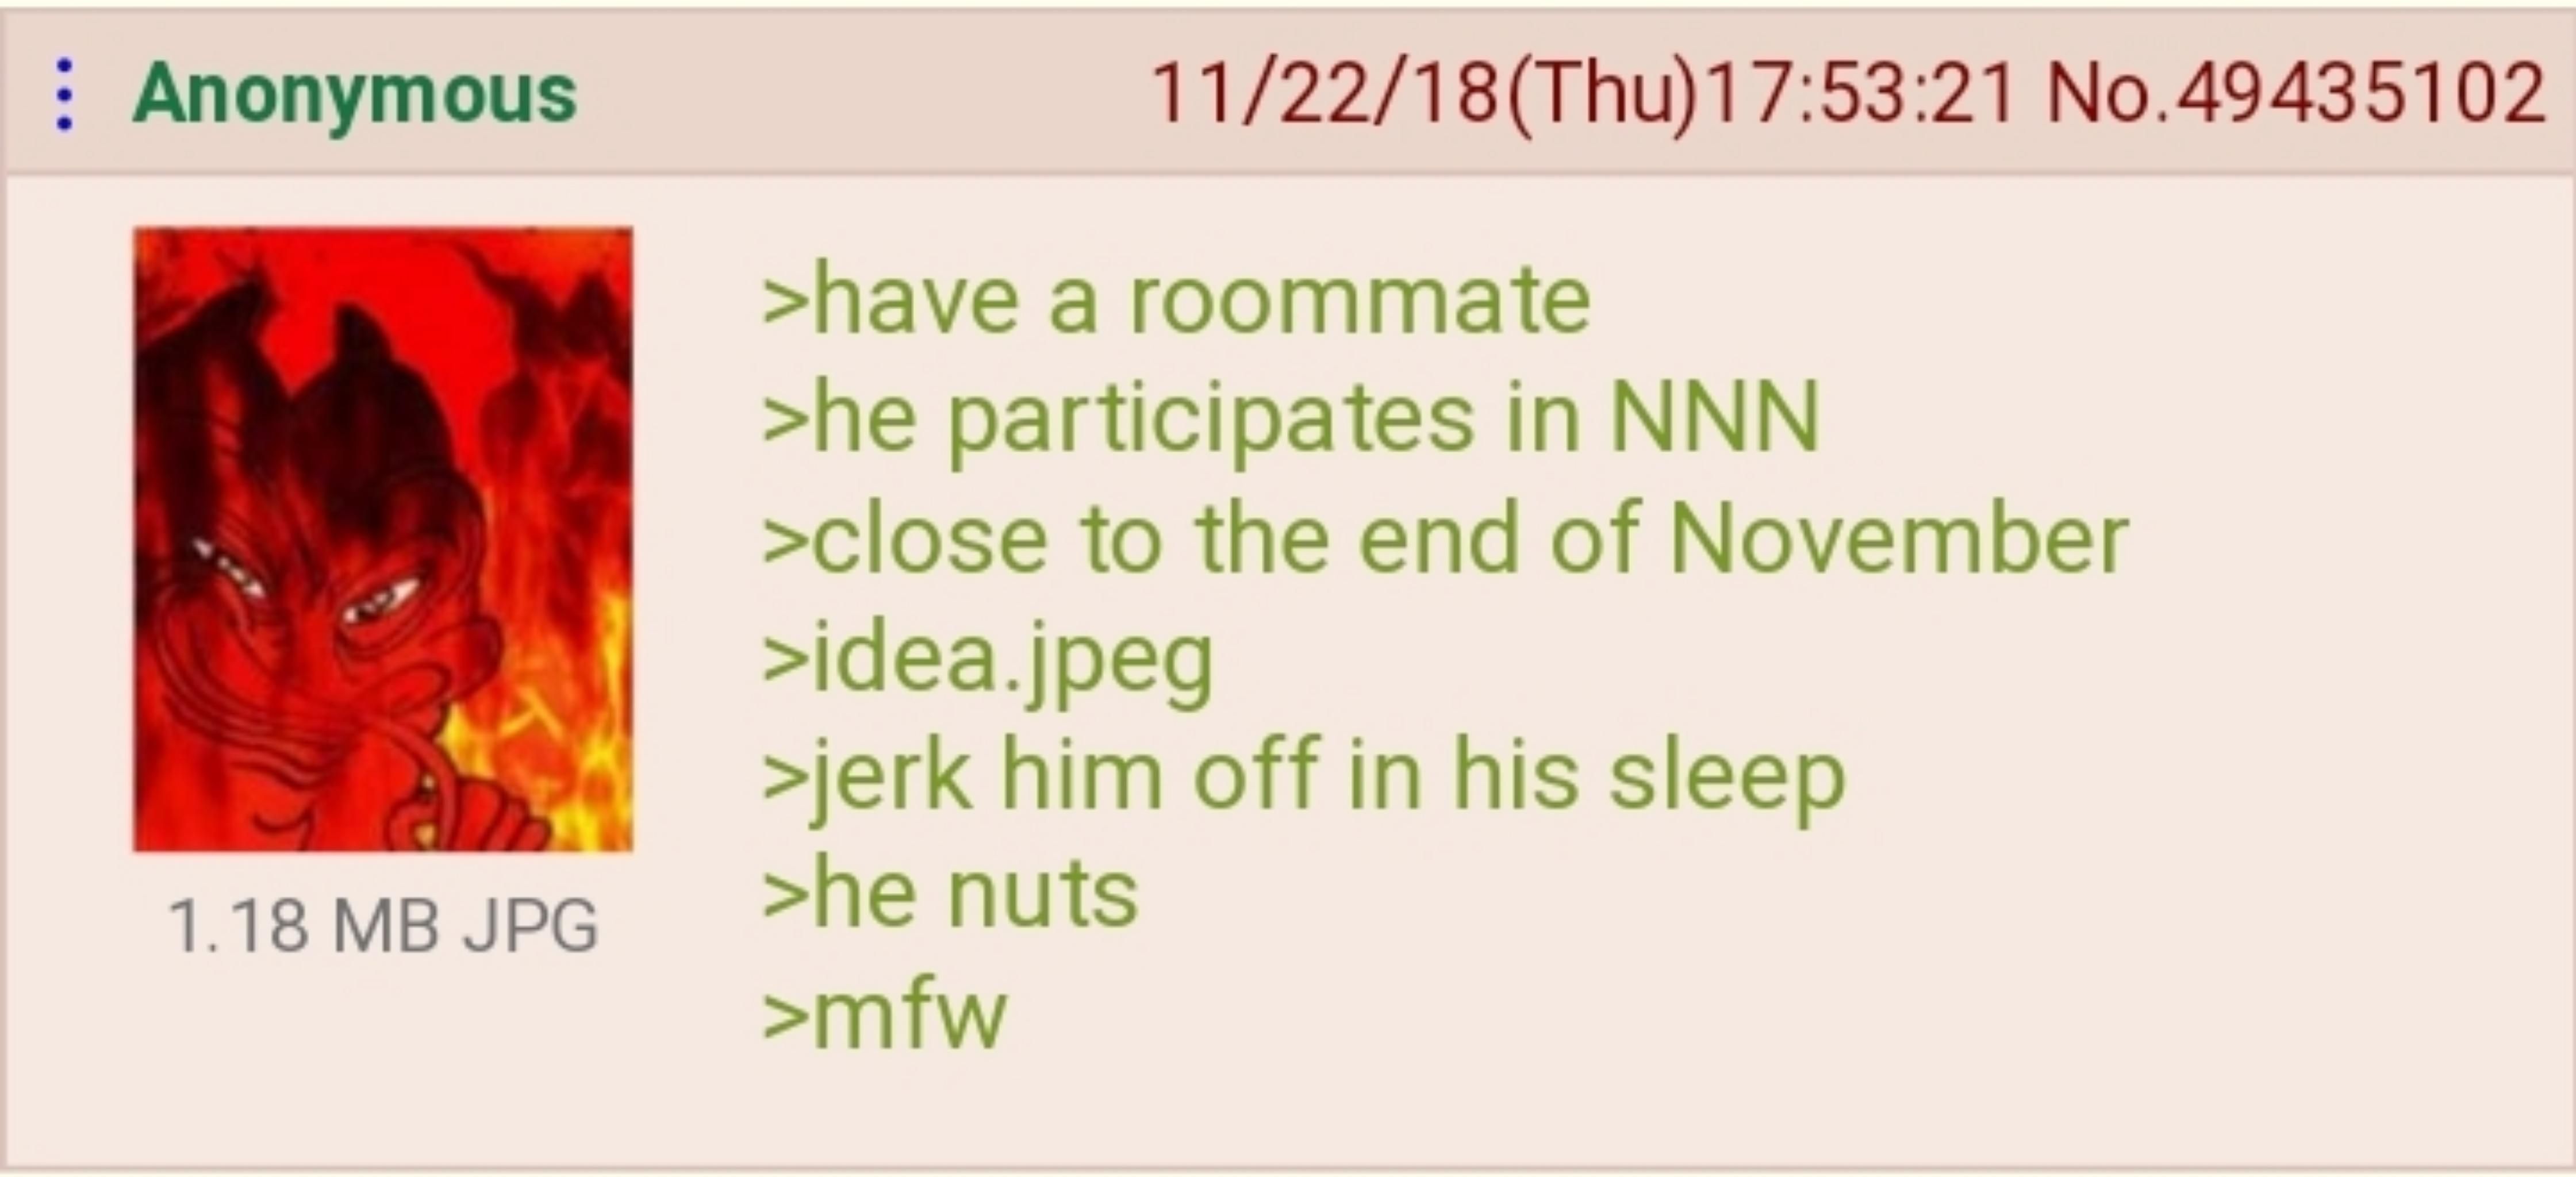 Anon is pure evil